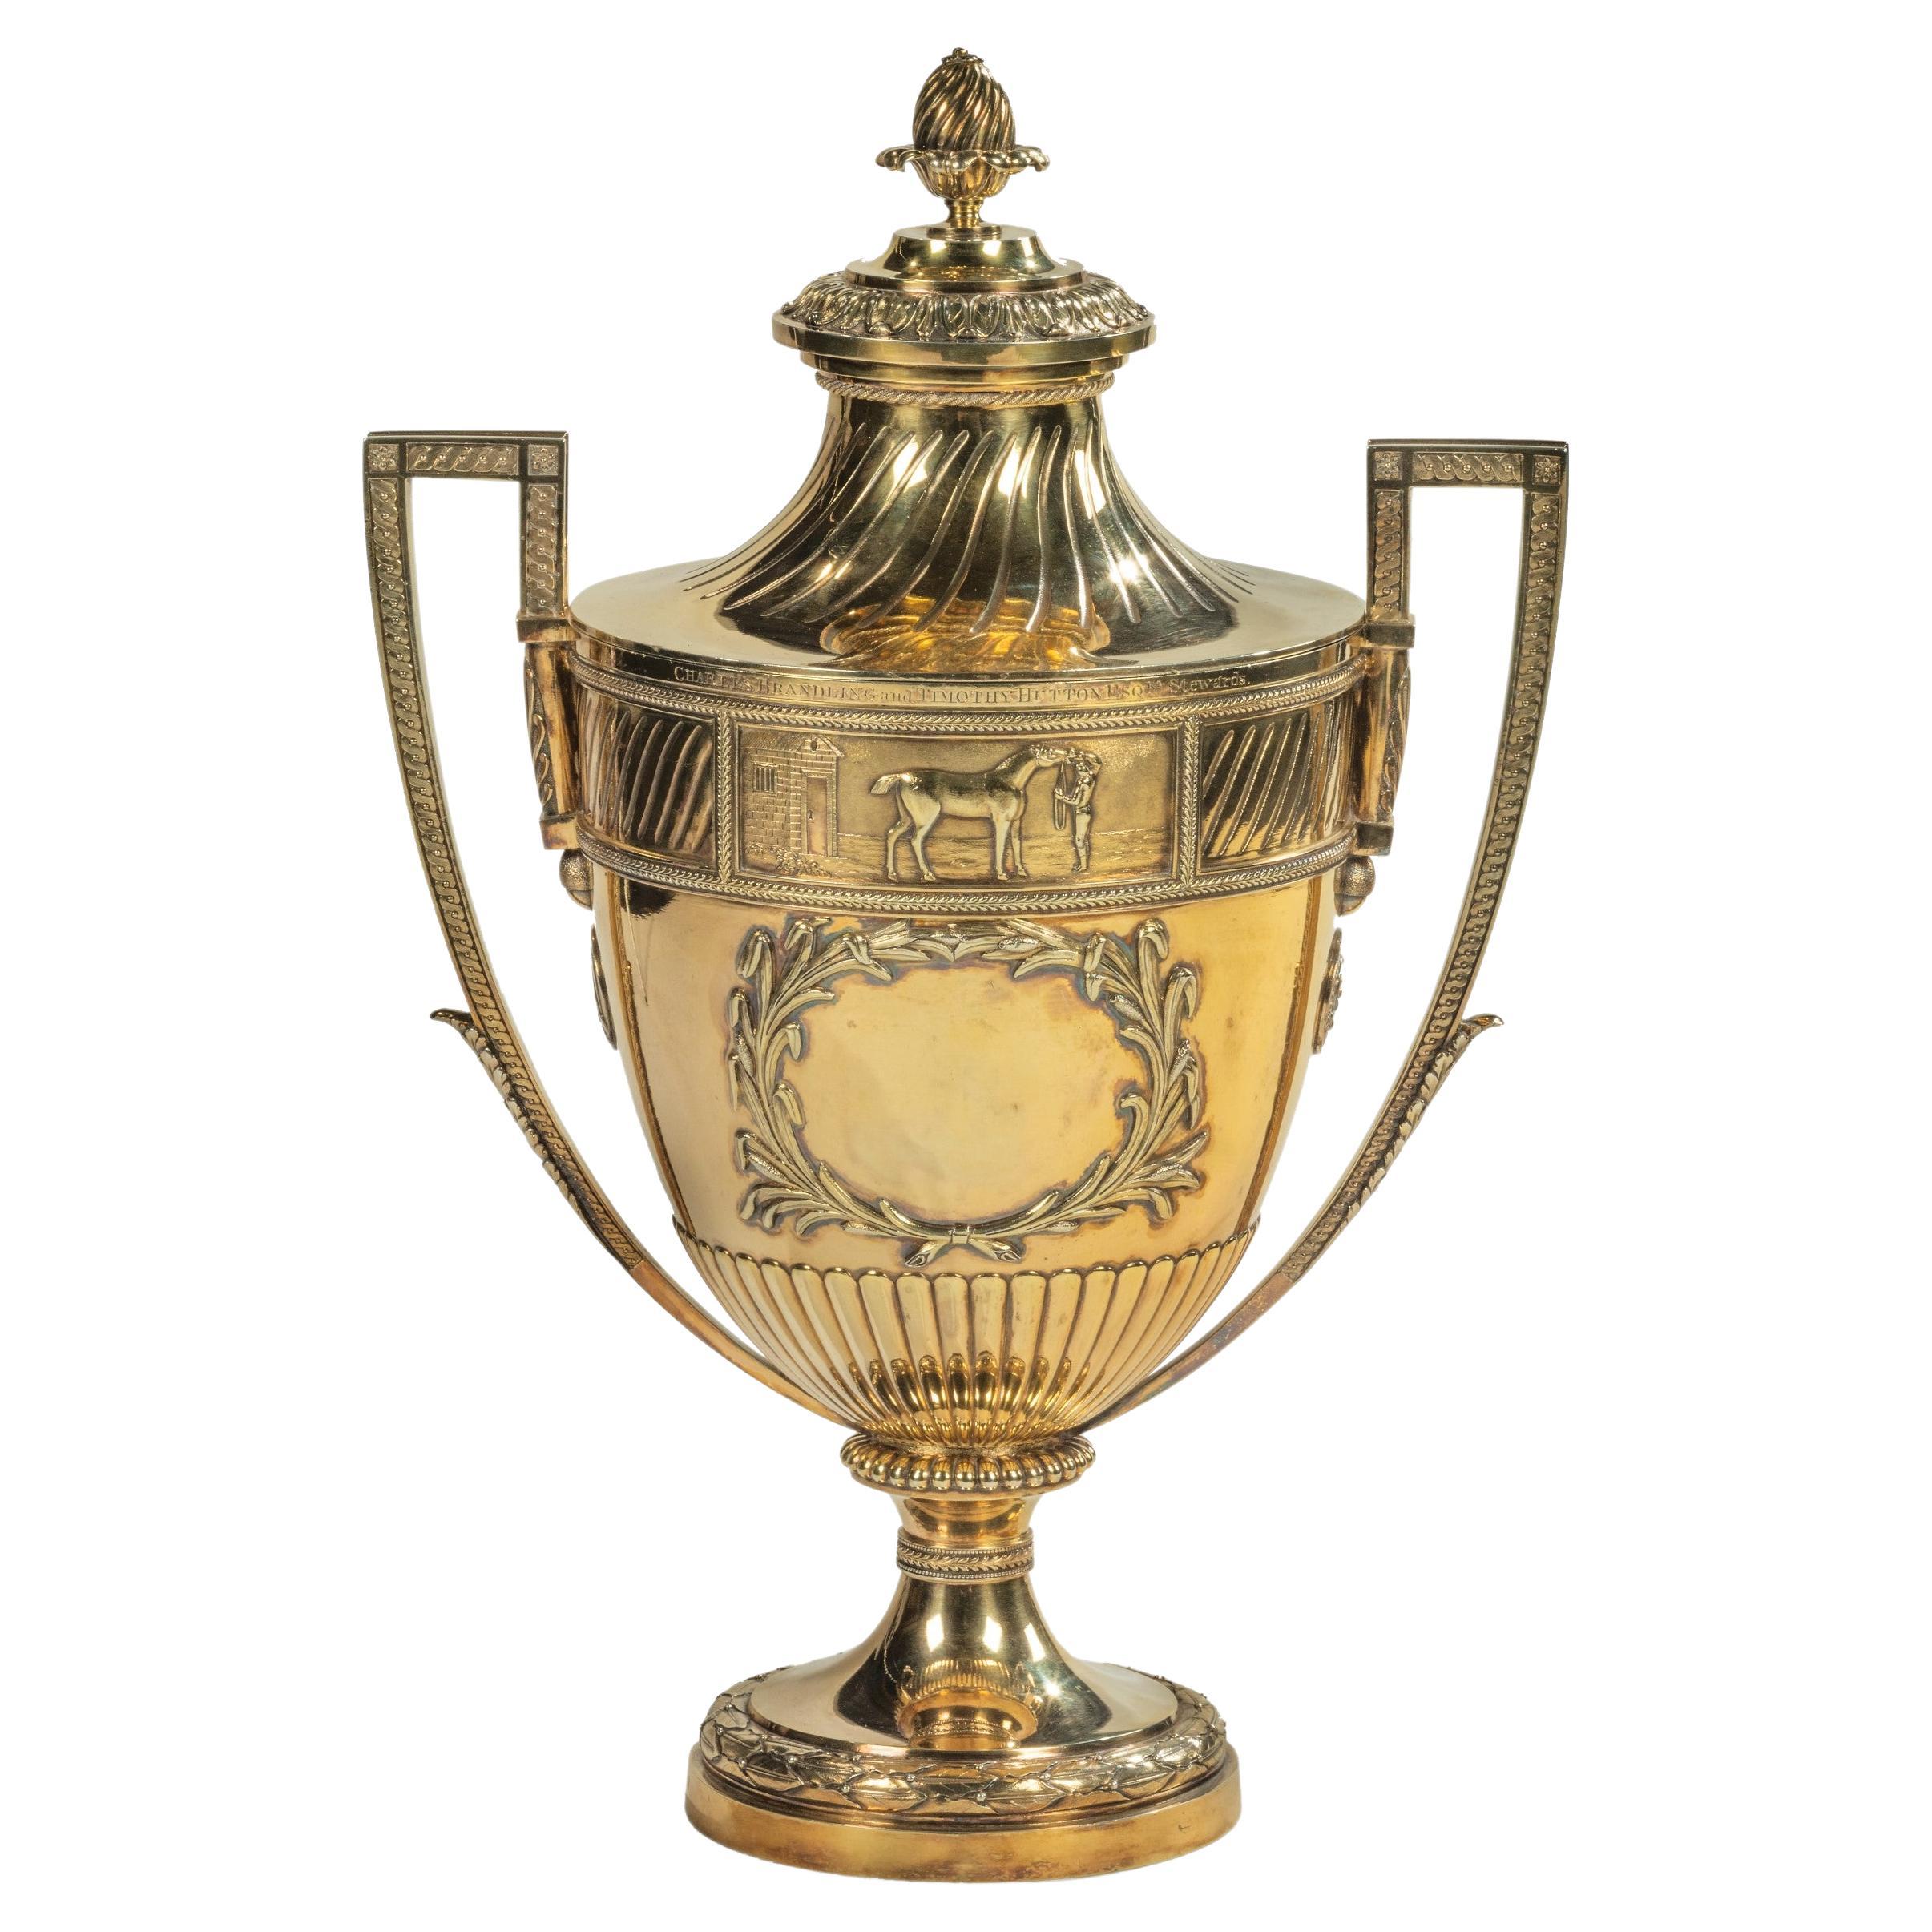 1802, Richmond “Gold Cup”, by Robert Adam, Paul Storr and Robert Makepeace For Sale